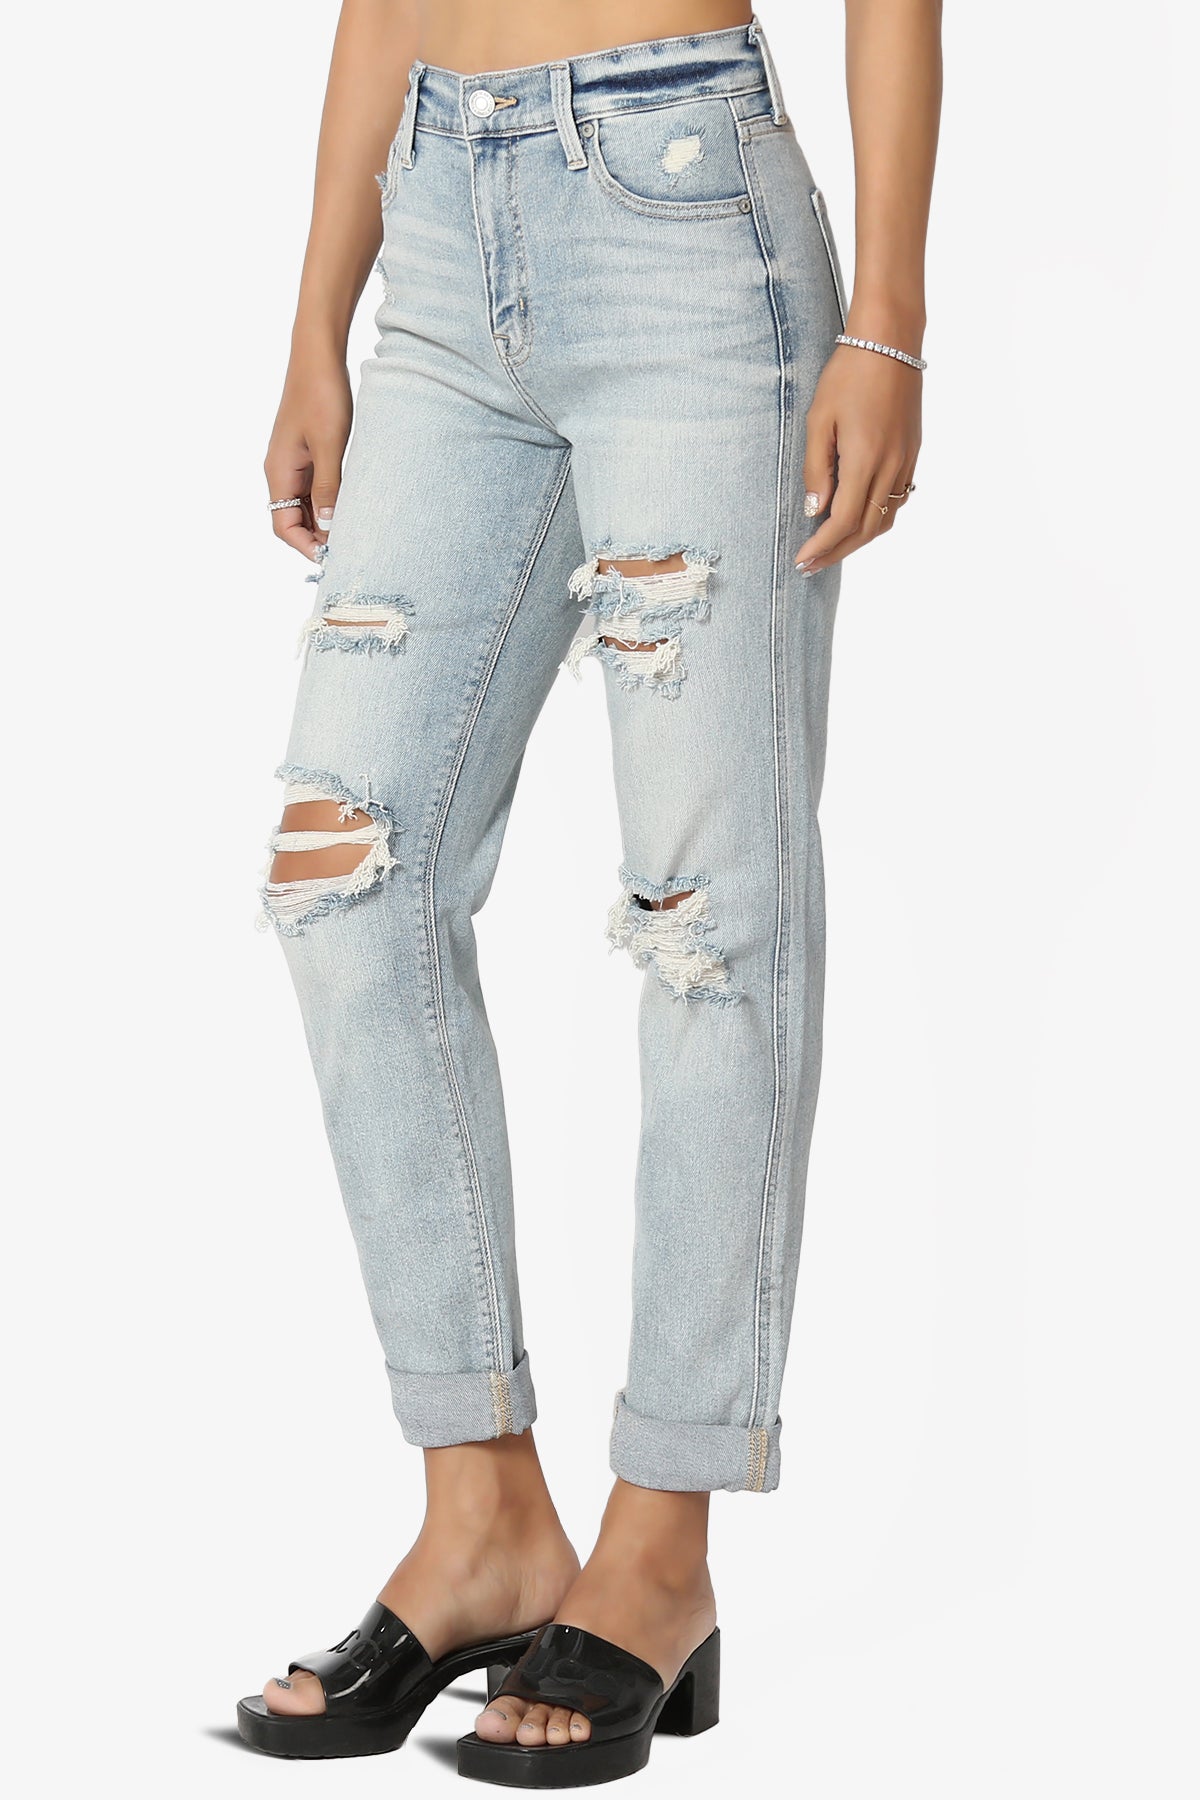 Rocky High Rise Distressed Boyfriend Jeans in ICMP LIGHT_3